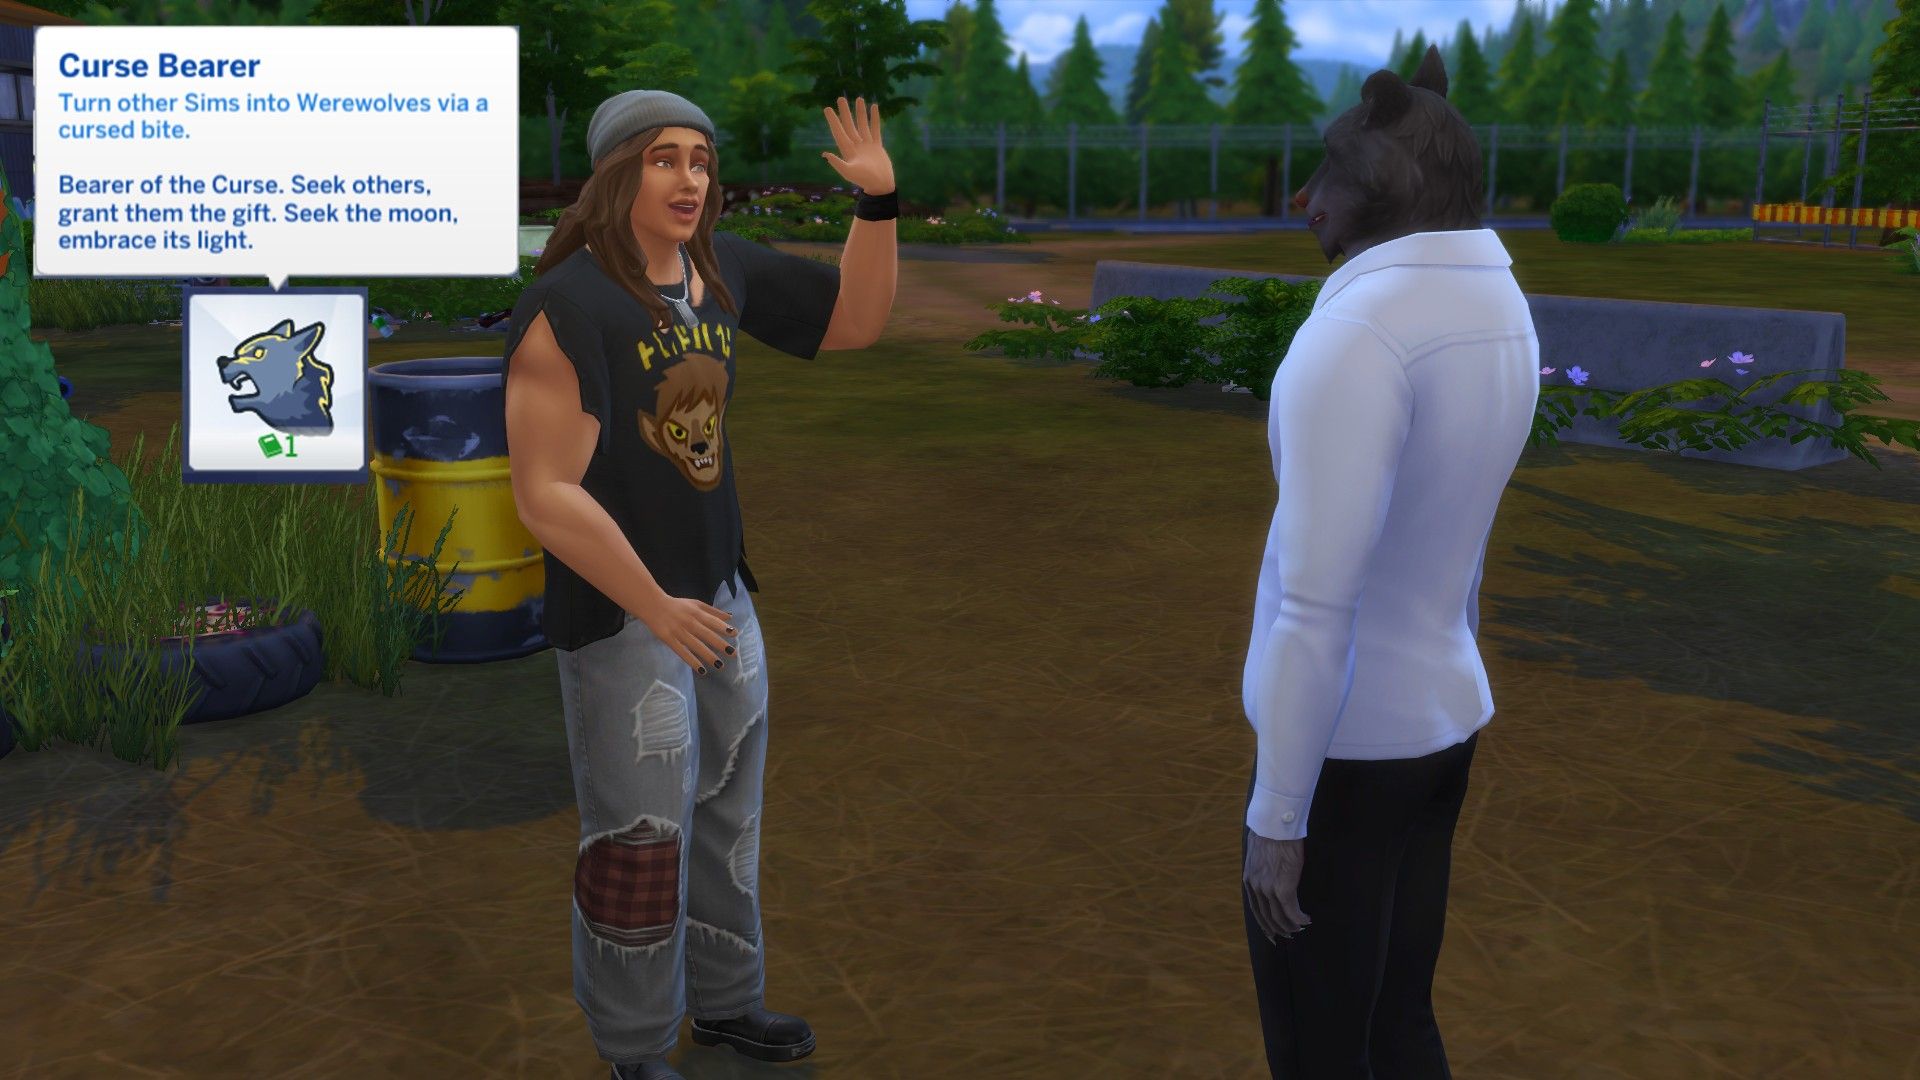 Befriending a werewolf Sim who can give you a Cursed Bite in The Sims 4 Werewolves